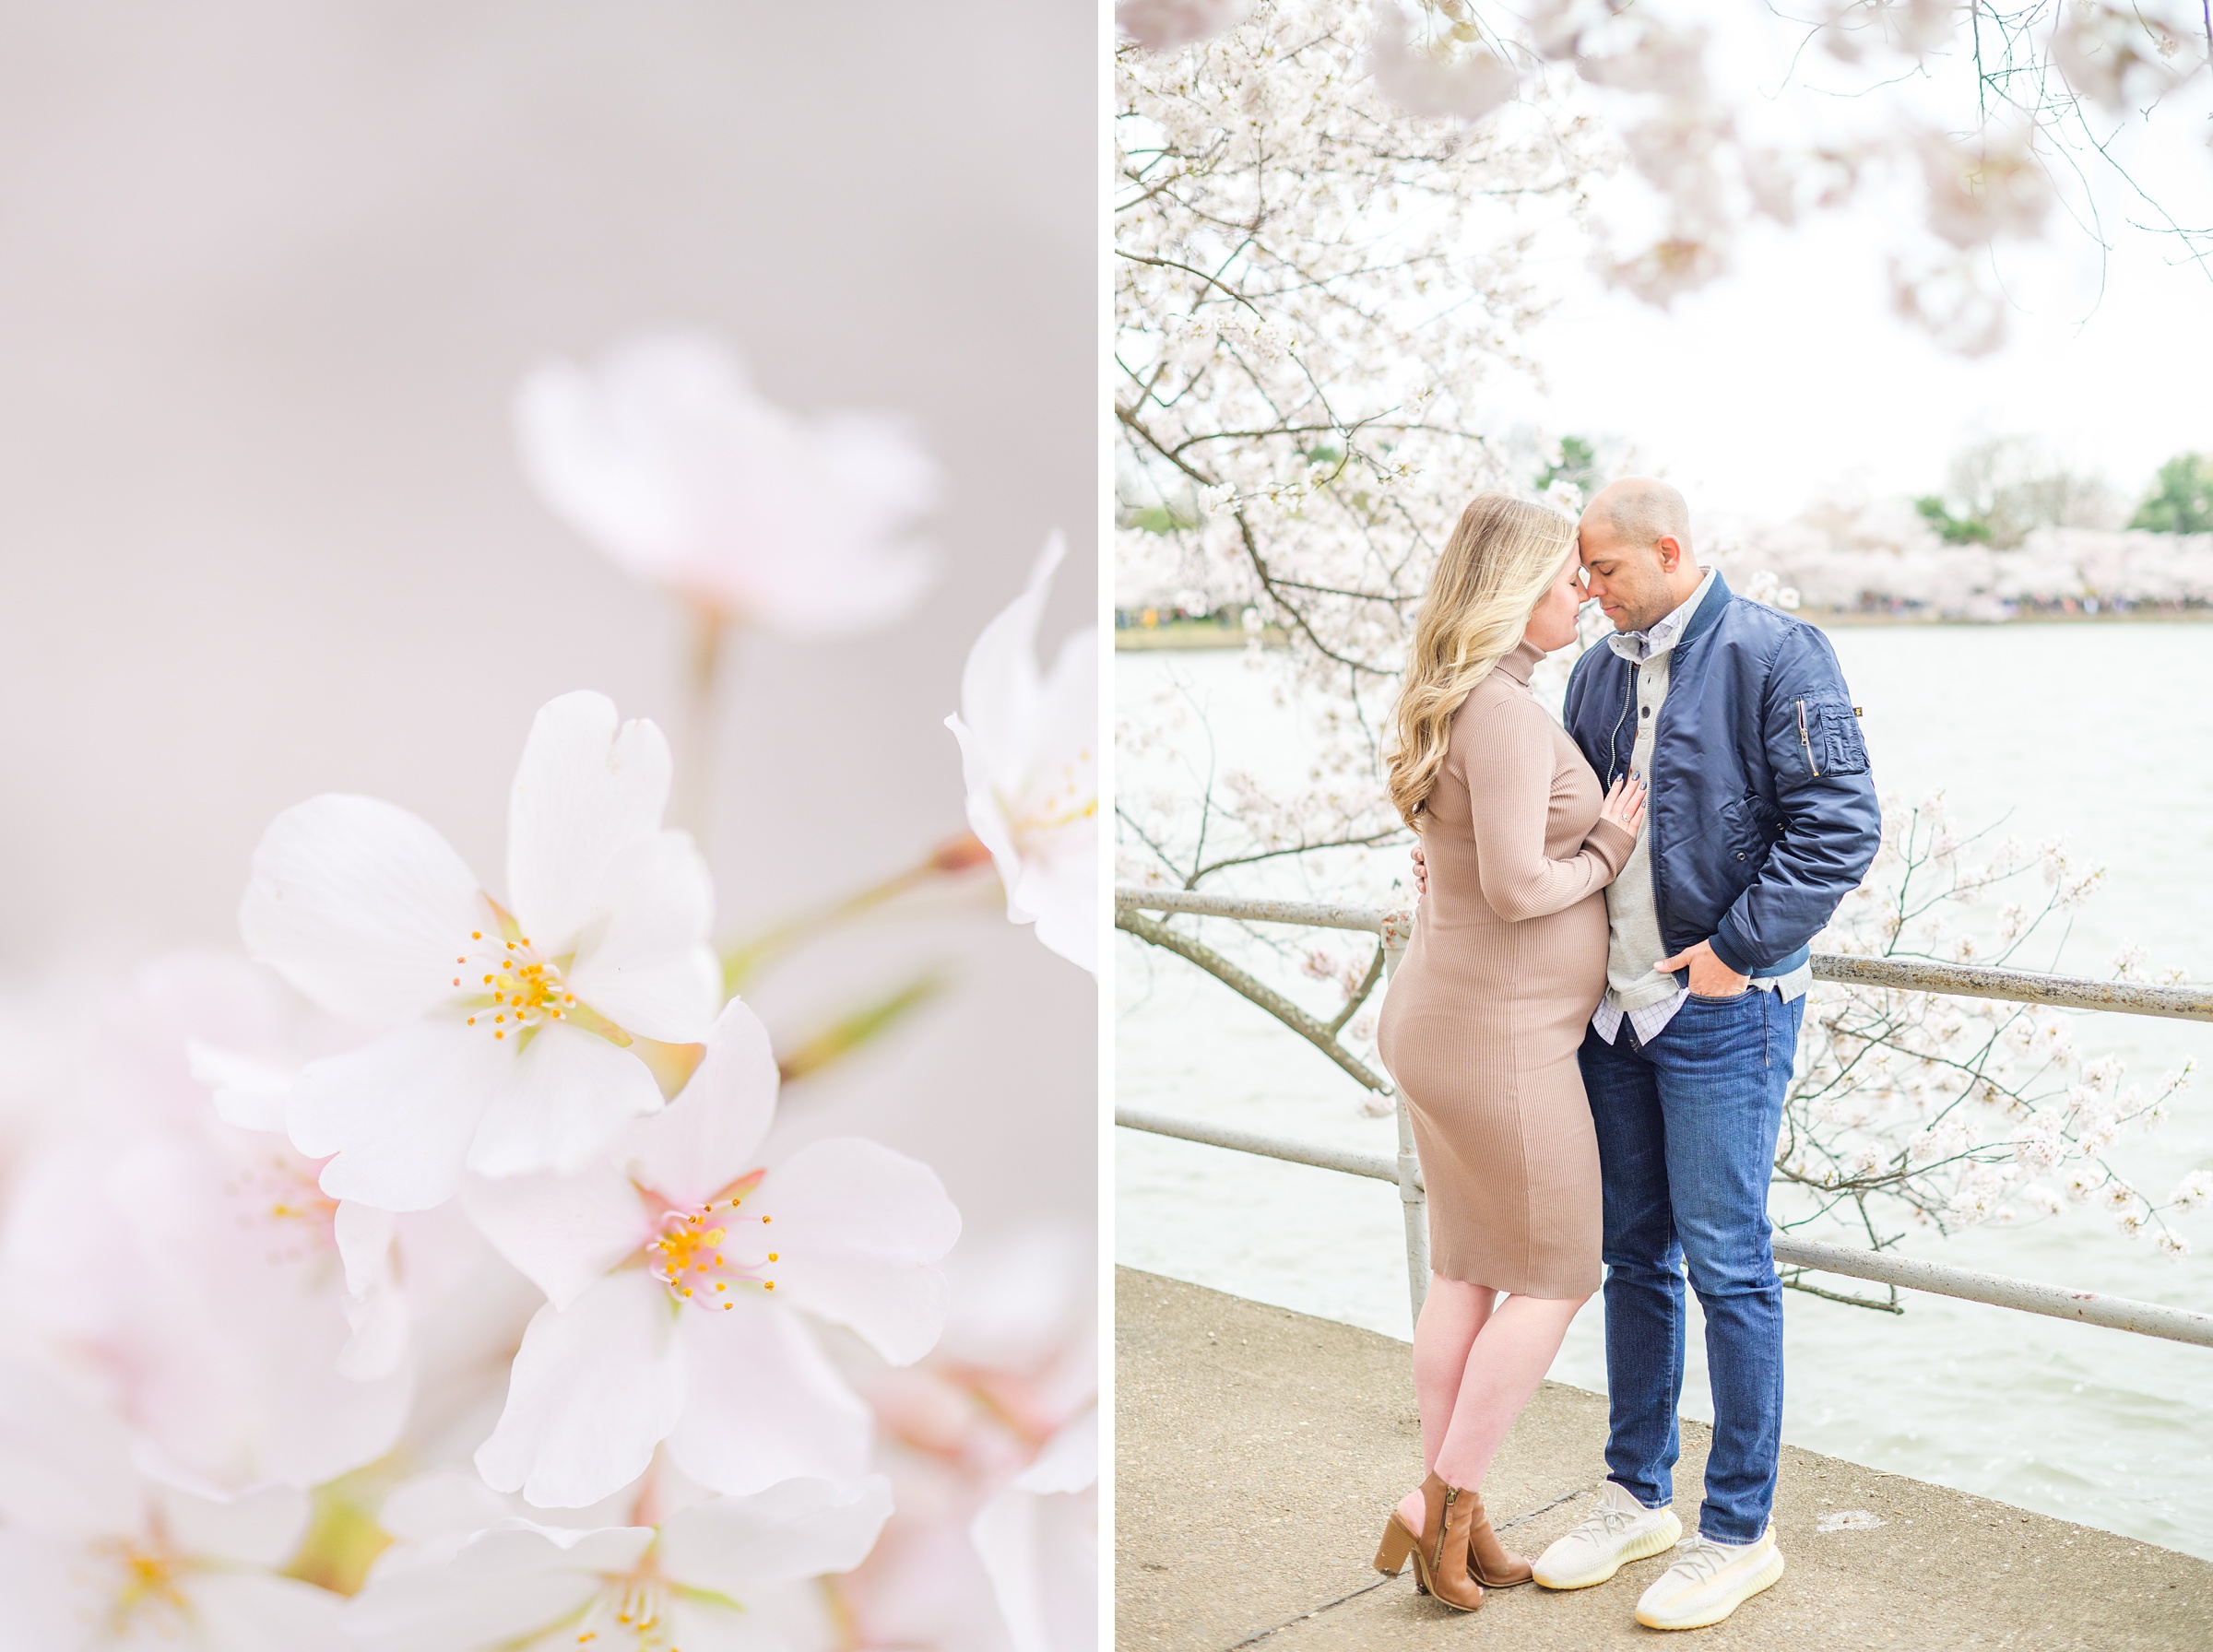 Mama and dad-to-be poses with her bump amongst the cherry blossoms at the Washington, DC Tidal Basin during a maternity session photographed by Cait Kramer Photography